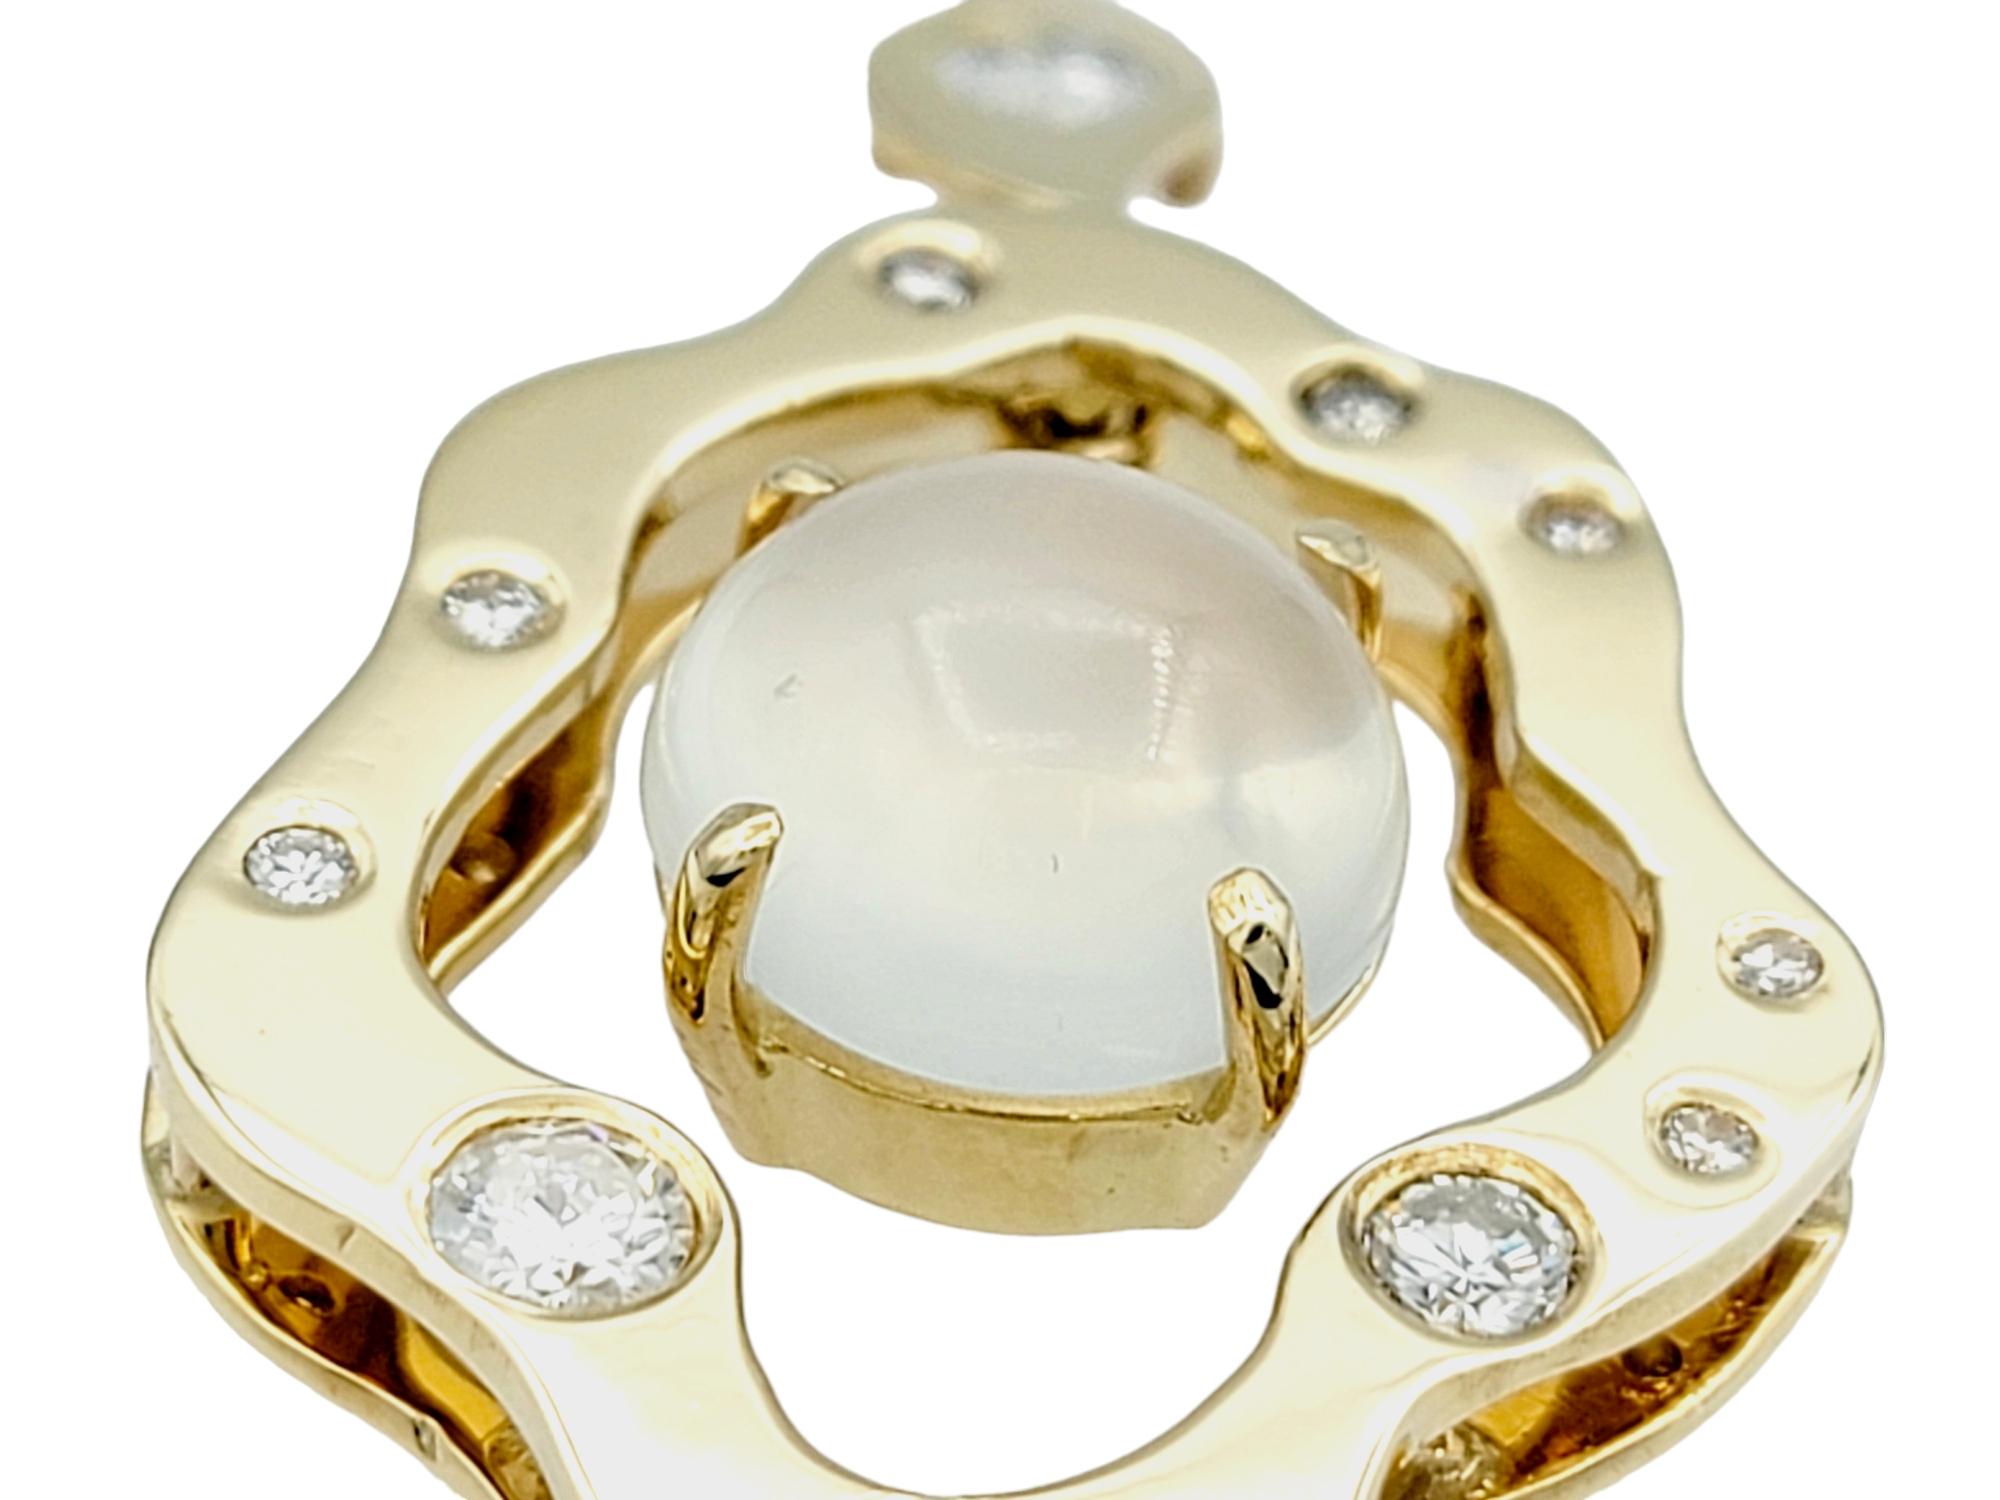 This 14 karat yellow gold pendant is an embodiment of artistic elegance, boasting an organic and uniquely asymmetrical shape that is both captivating and distinctive. Its design sets it apart from conventional jewelry, emphasizing the beauty of